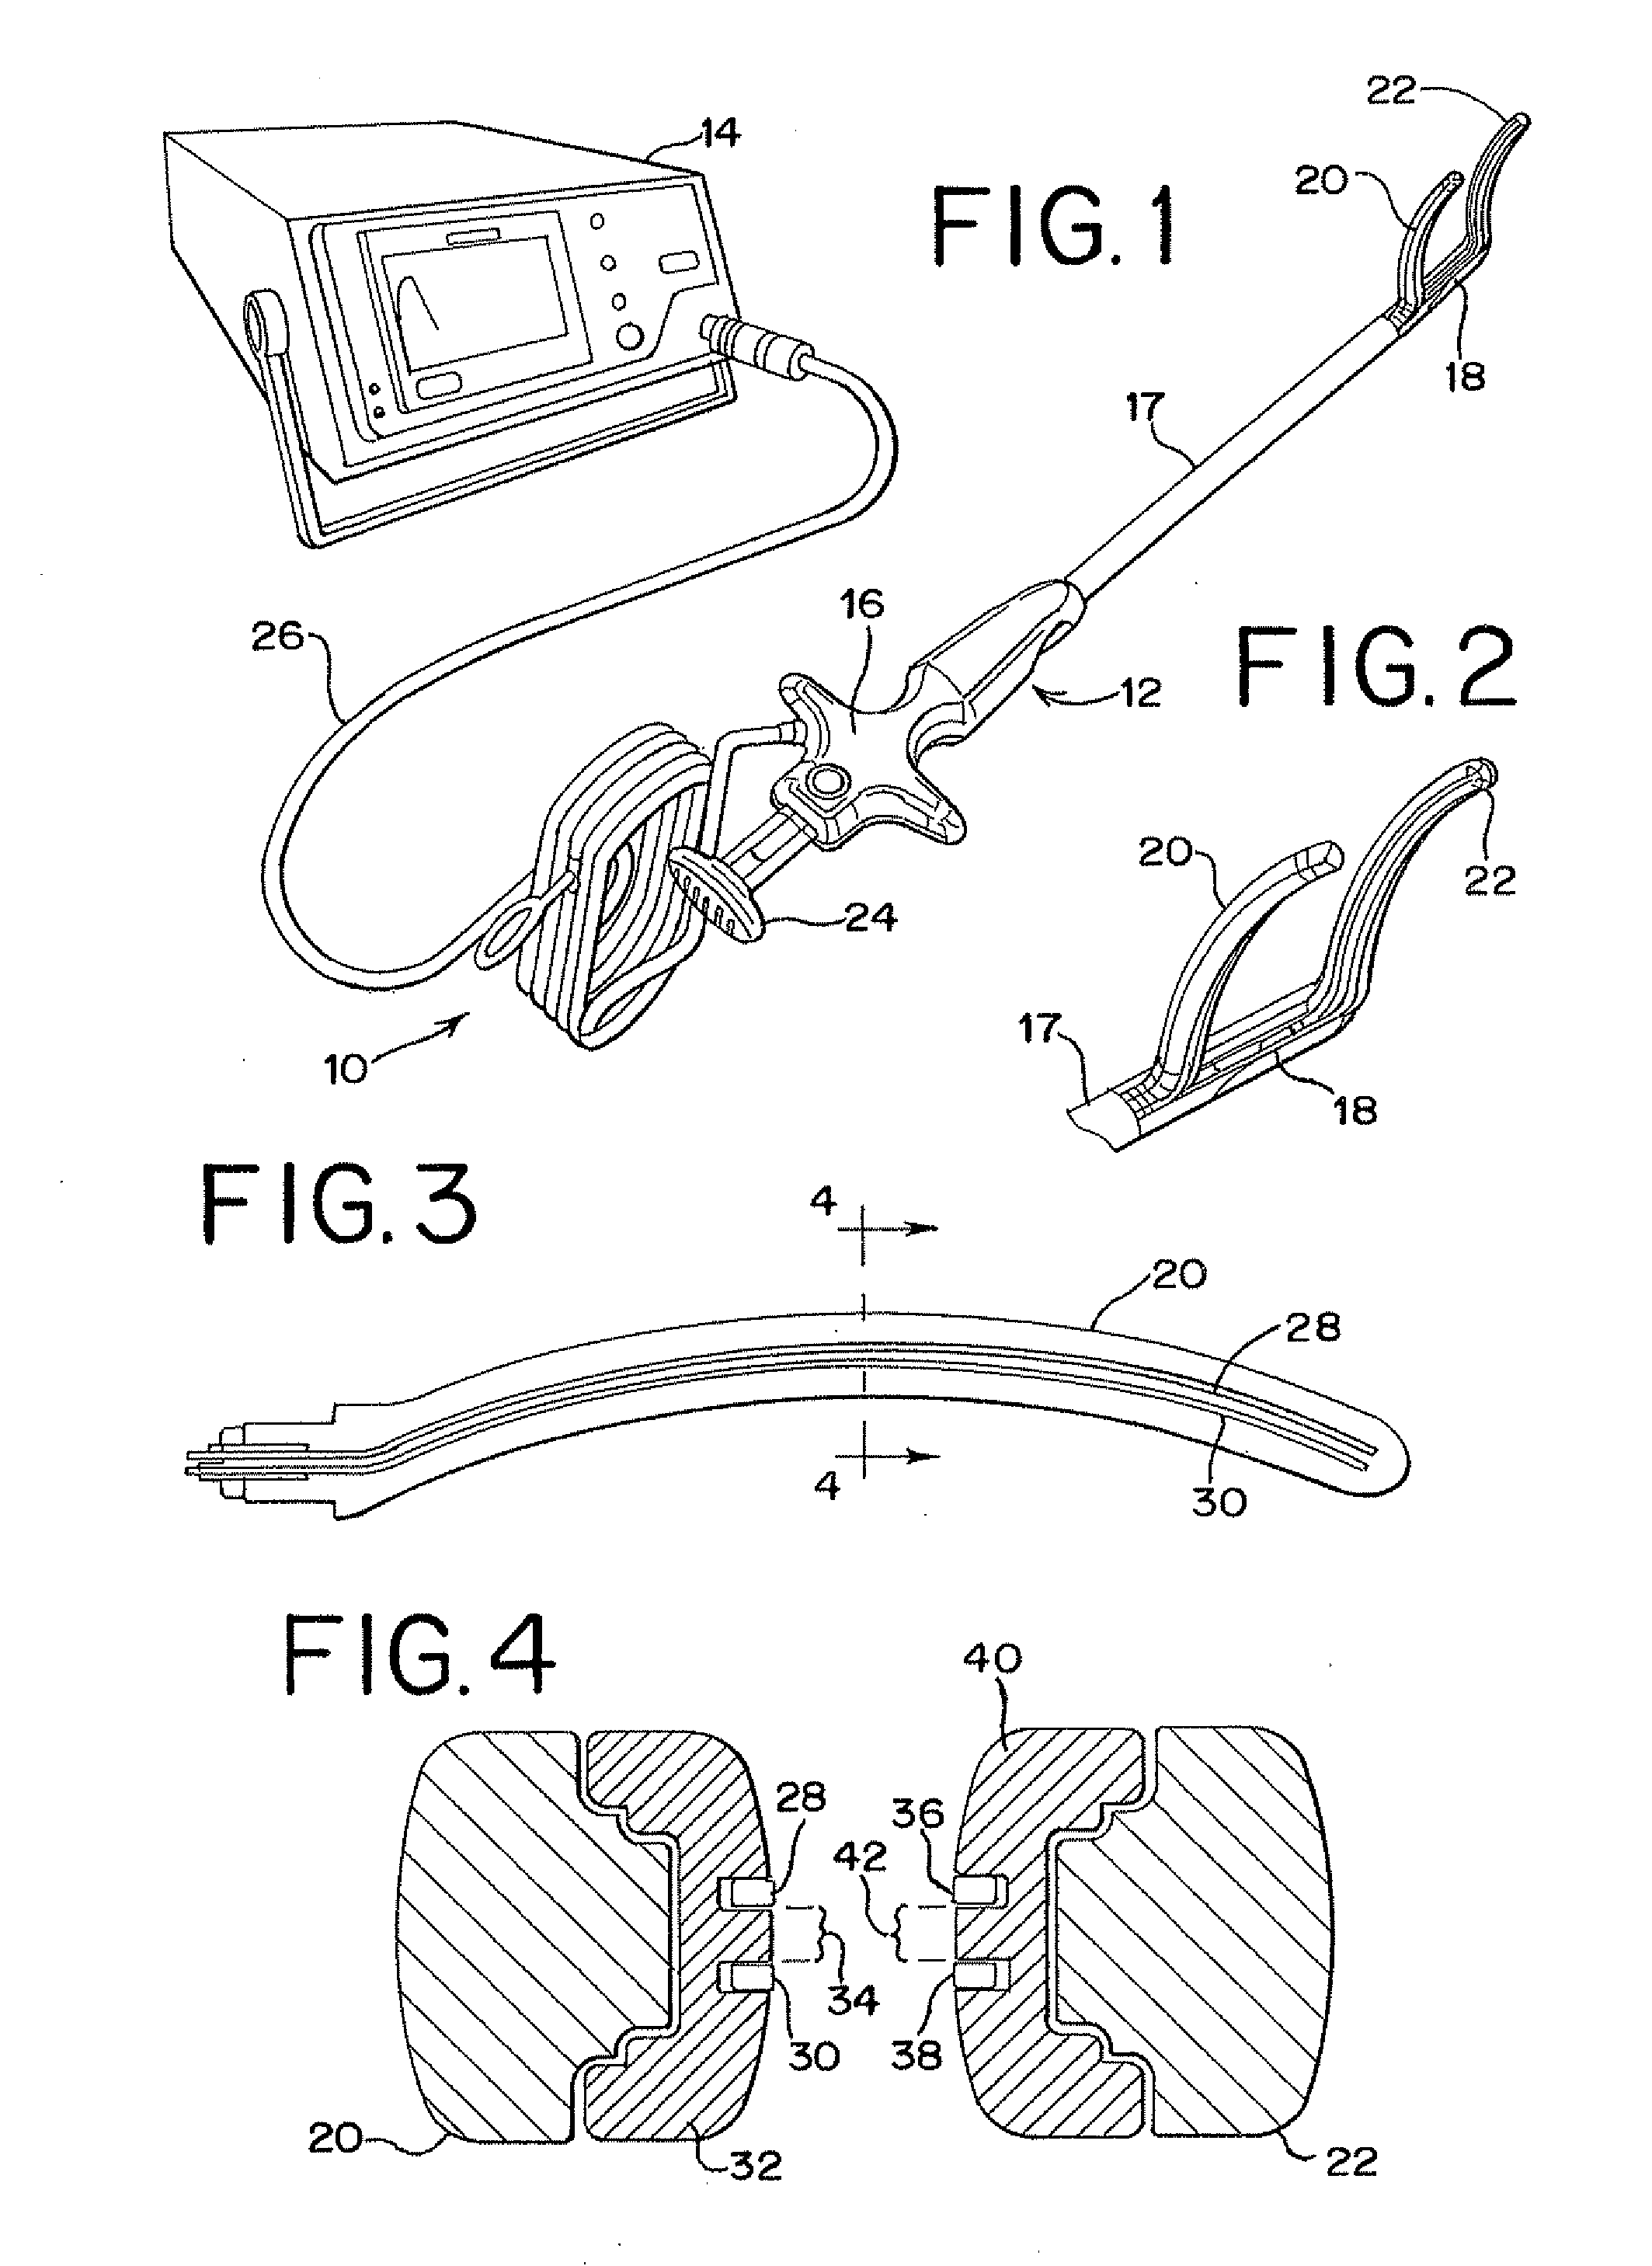 Ablation system, clamp and method of use